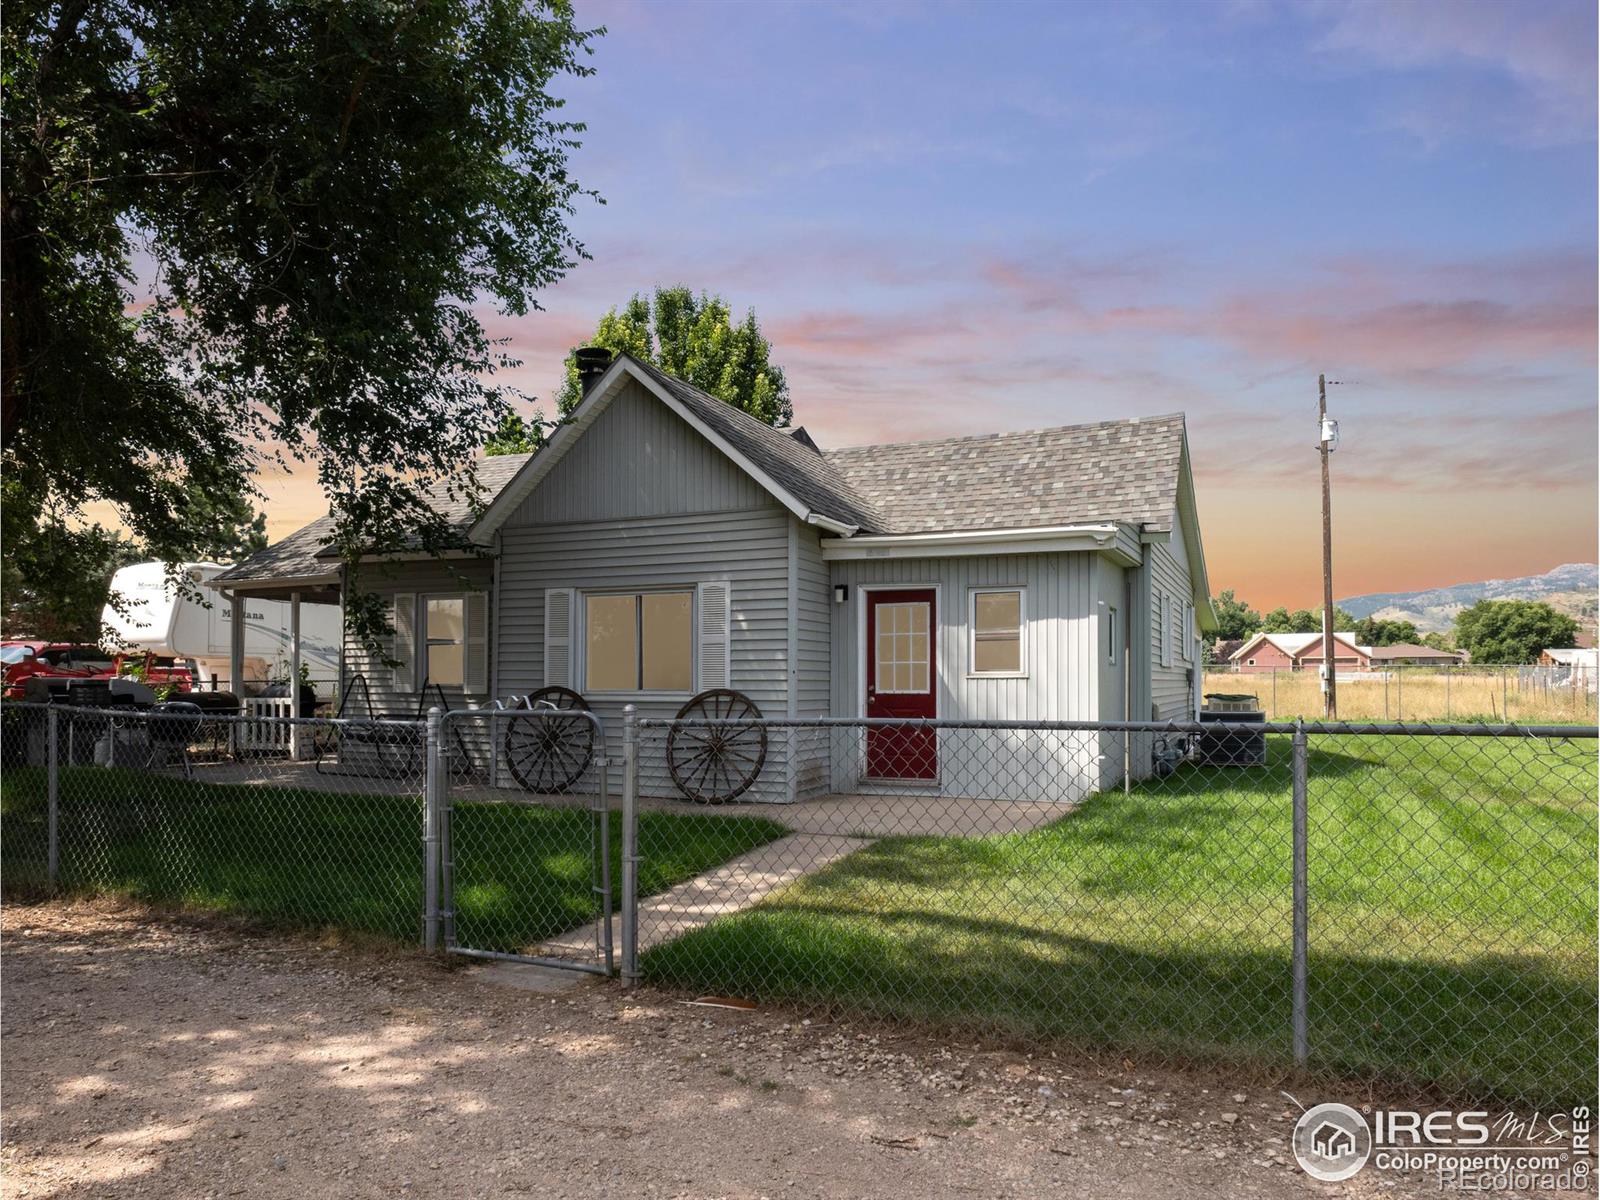 2127 w county road 38 e , fort collins sold home. Closed on 2024-03-15 for $627,500.